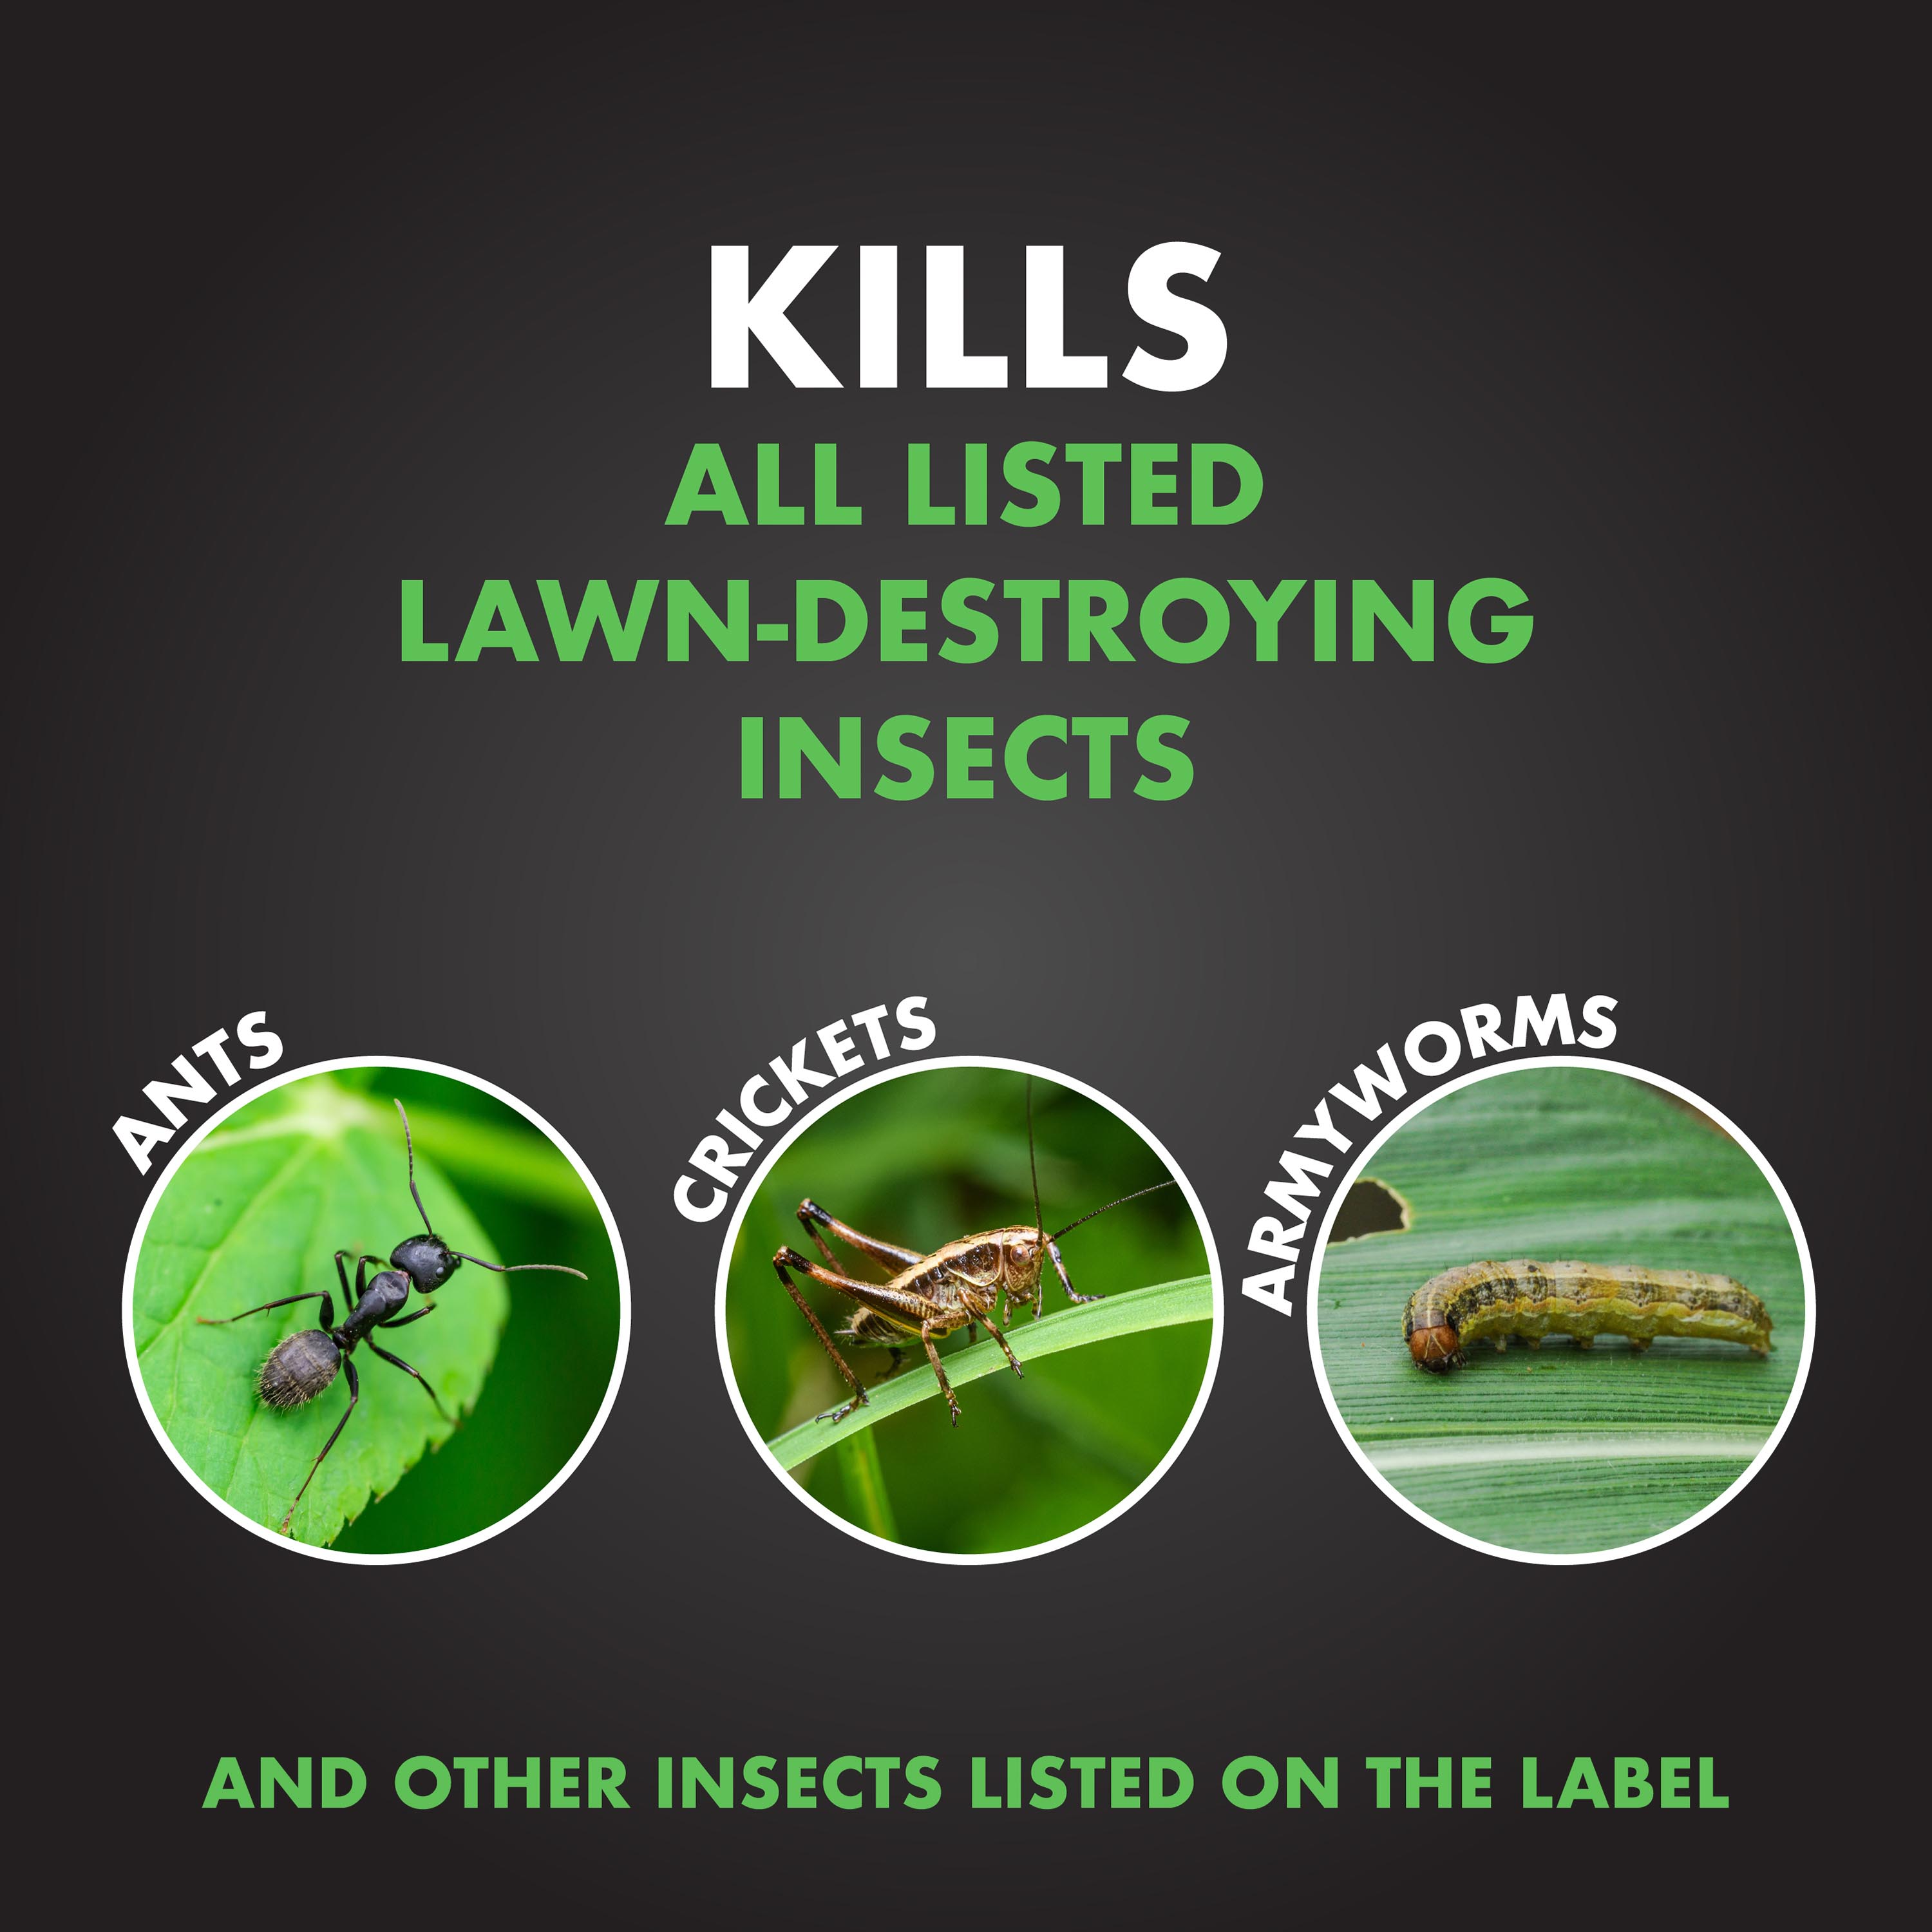 Spectracide Triazicide Insect Killer for Lawns, Granules Kill Listed Lawn-Damaging Insects, 20 lbs. - image 4 of 15